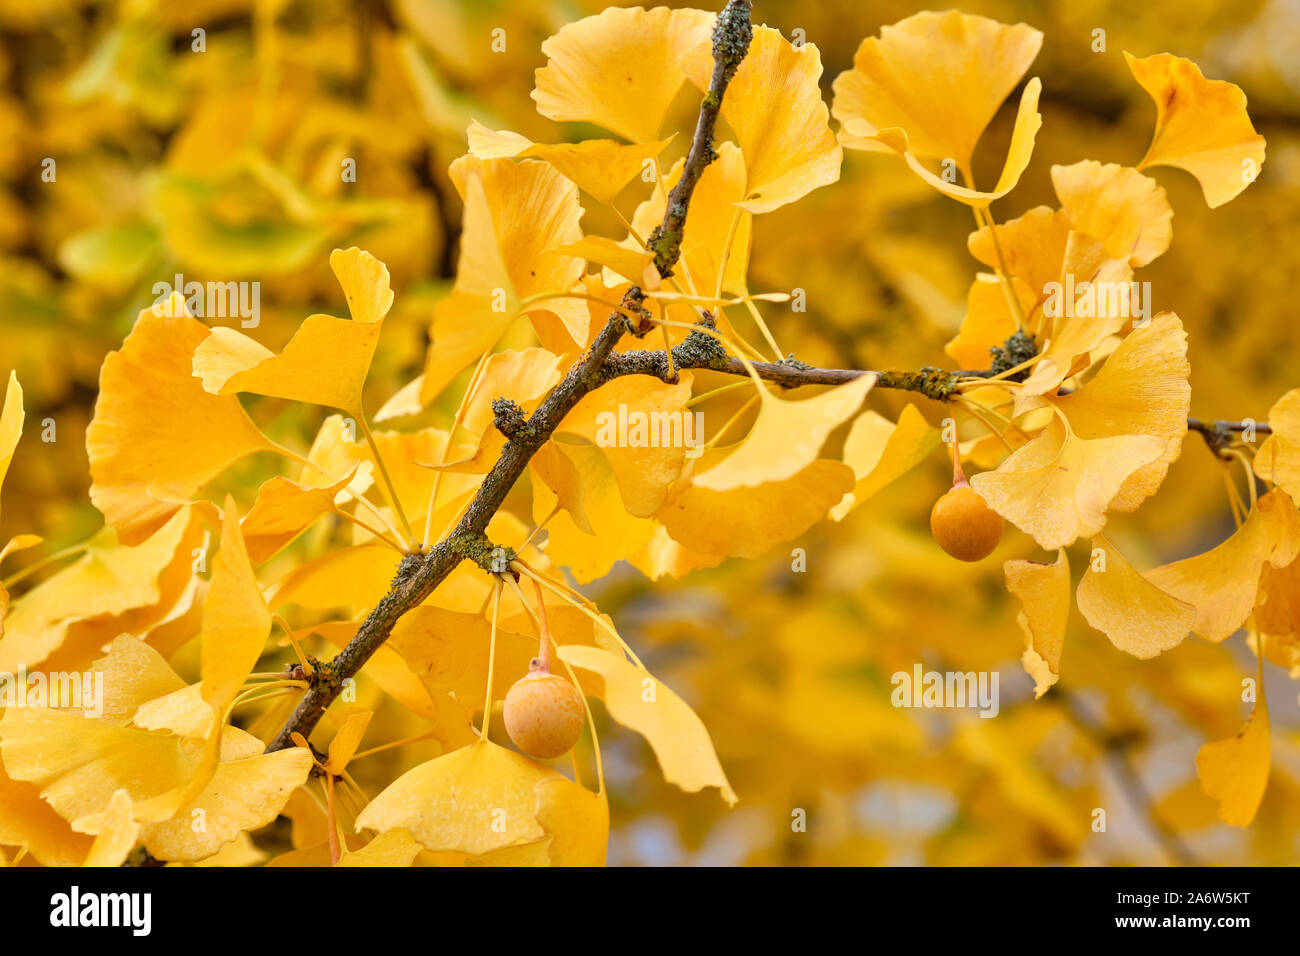 Closeup of the beautiful bright yellow  autumn leaves of a ginkgo tree and its fruits. Seen in Germany, Bavaria in October. Stock Photo